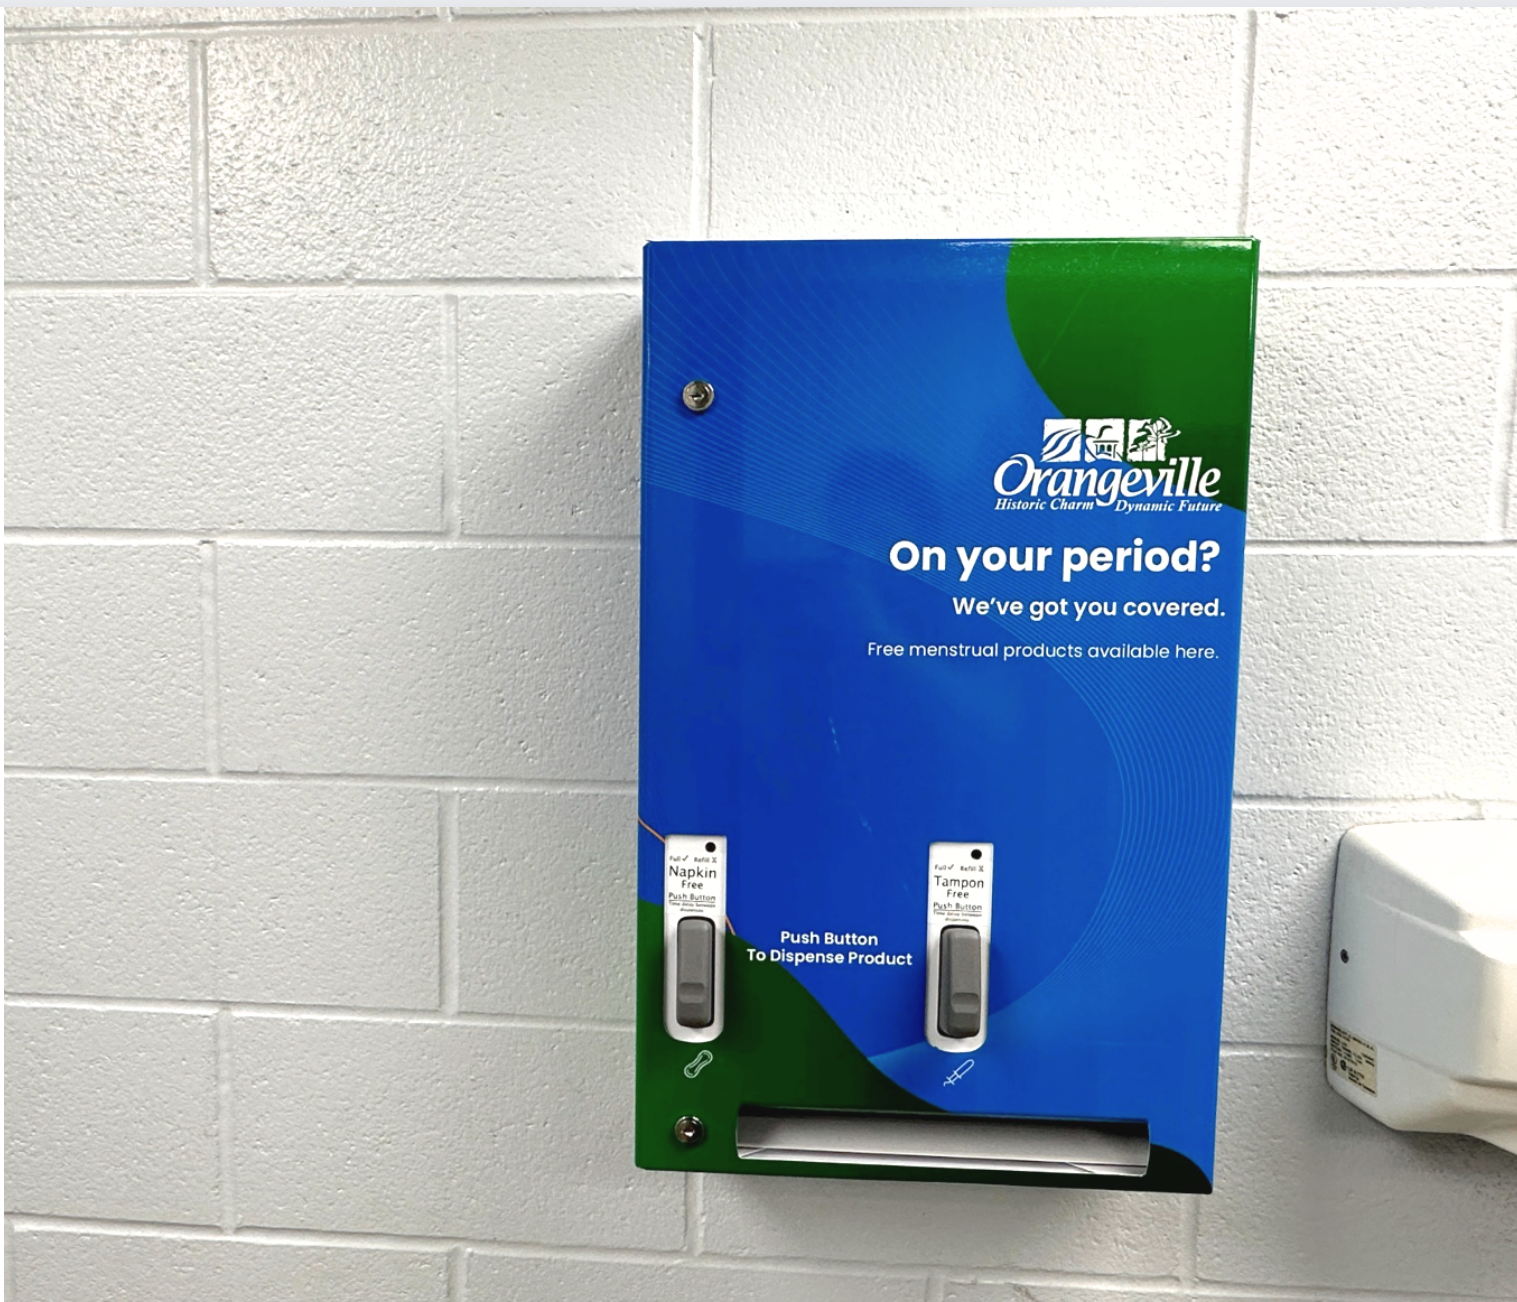 A picture of a menstrual product dispenser